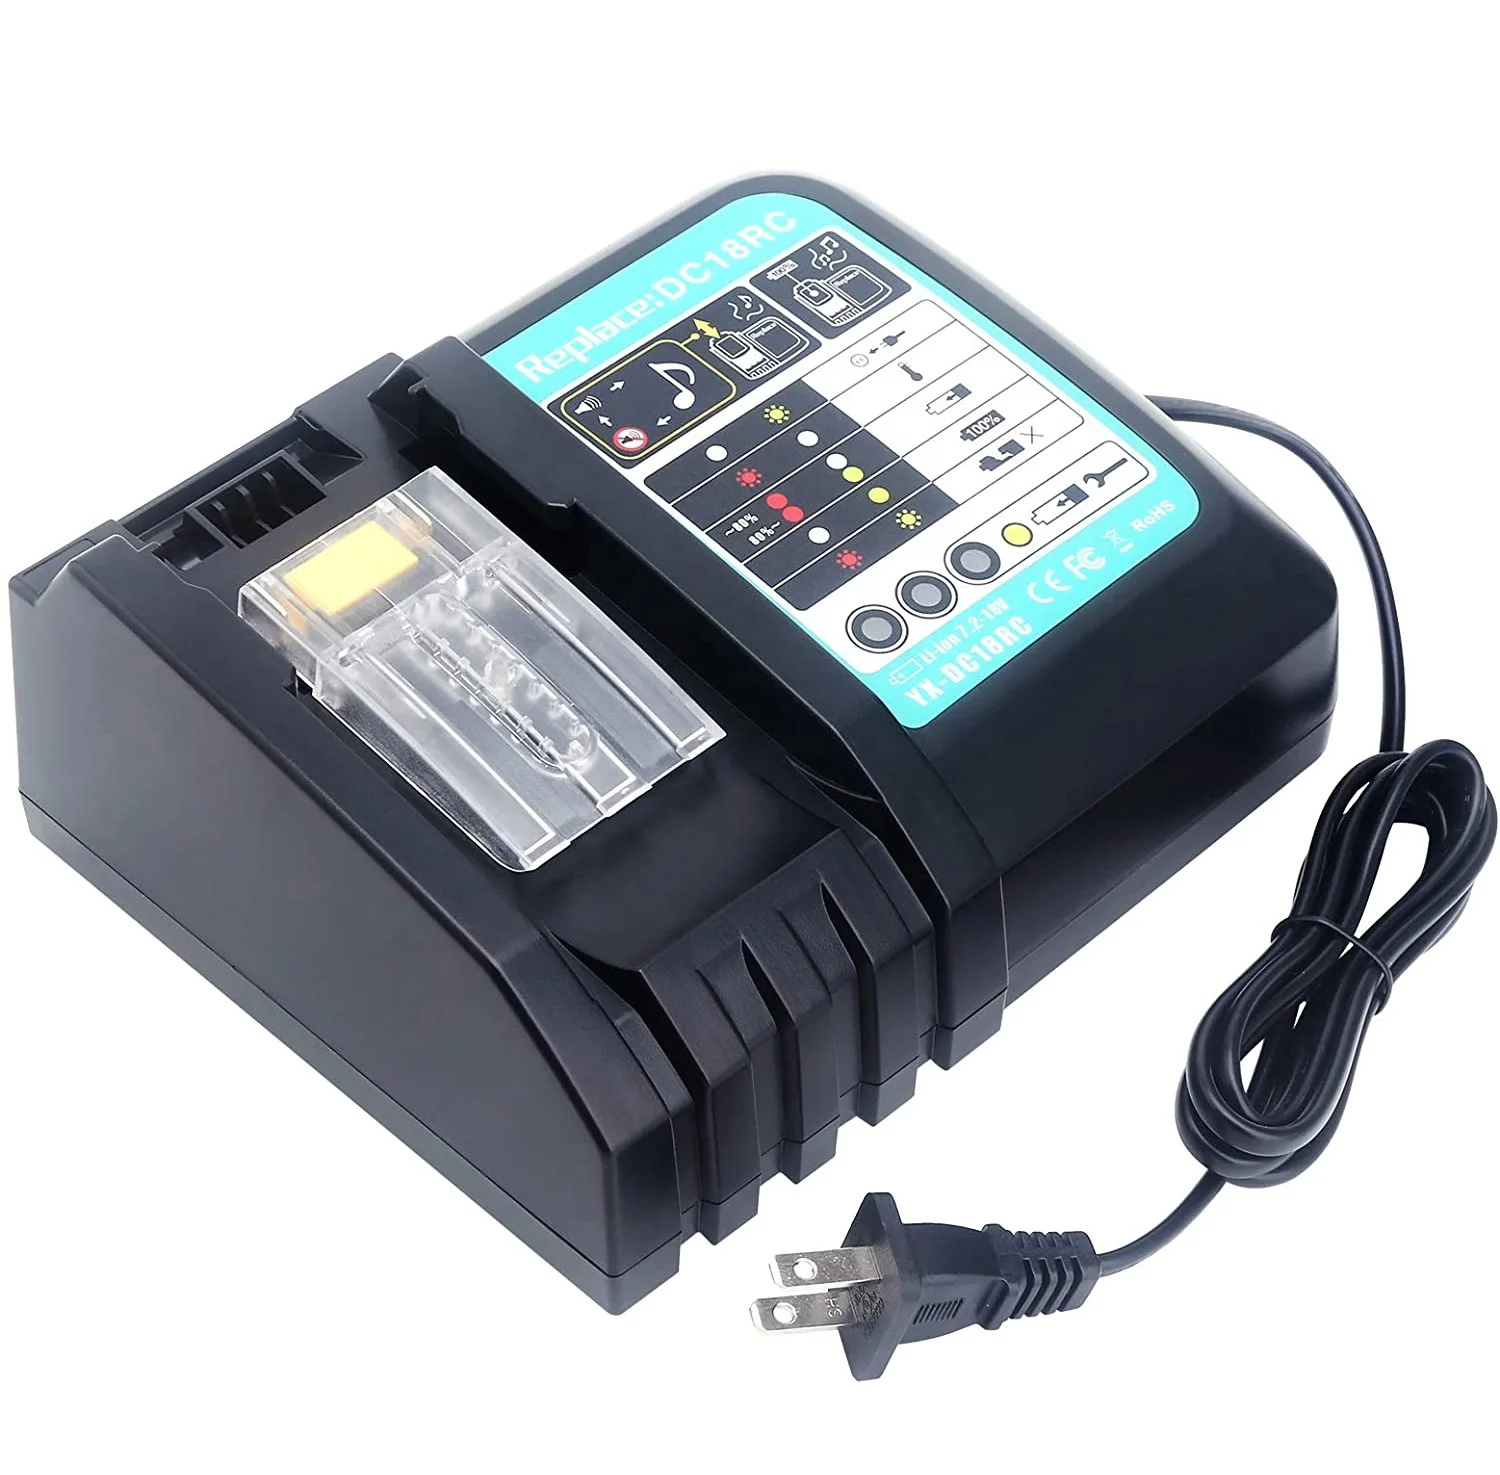 

Charger For Makitas DC18RC 14.4V to 18V Fast Lithium Ion Battery Charger New replace DC18RA DC18SD BL1860 BL1830 BL1850 charger, Black